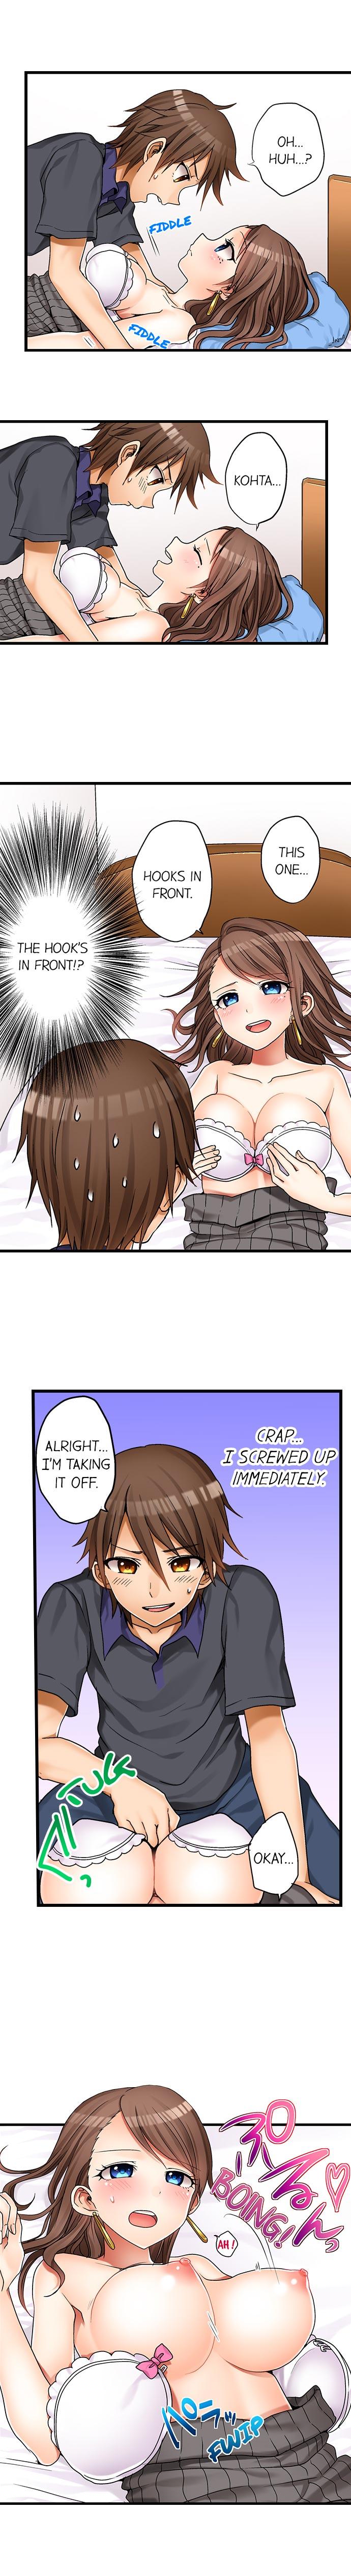 Comendo Hatsuecchi no Aite wa... Imouto! My First Time is with.... My Little Sister ! Milfs - Page 4